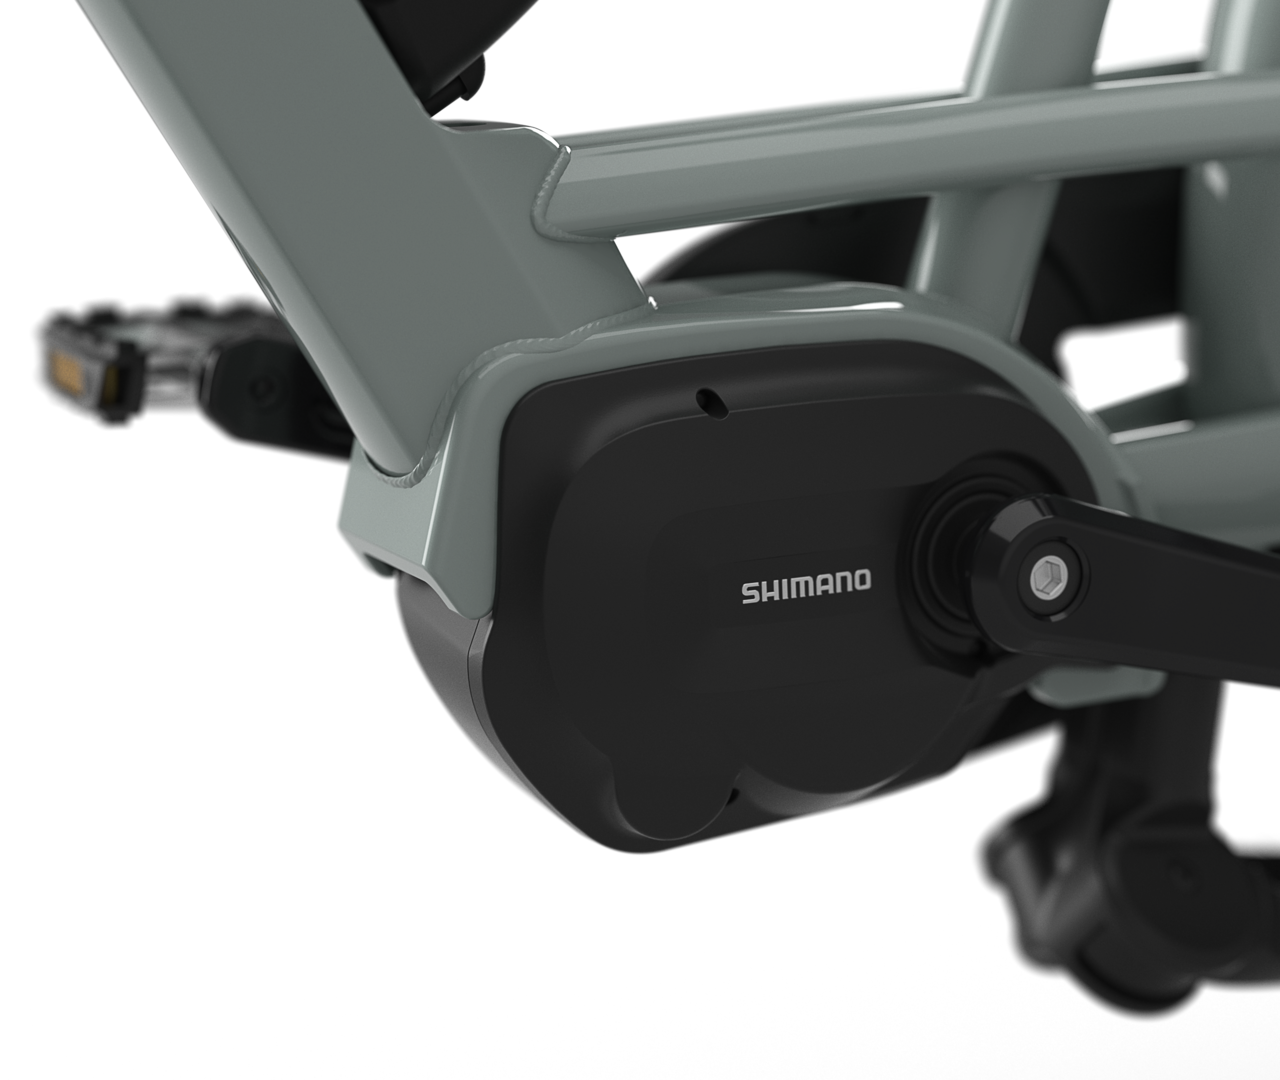 The Shimano E5000 motor is positioned mid-drive and ideally suited for commuting to work as well as the daily shopping.